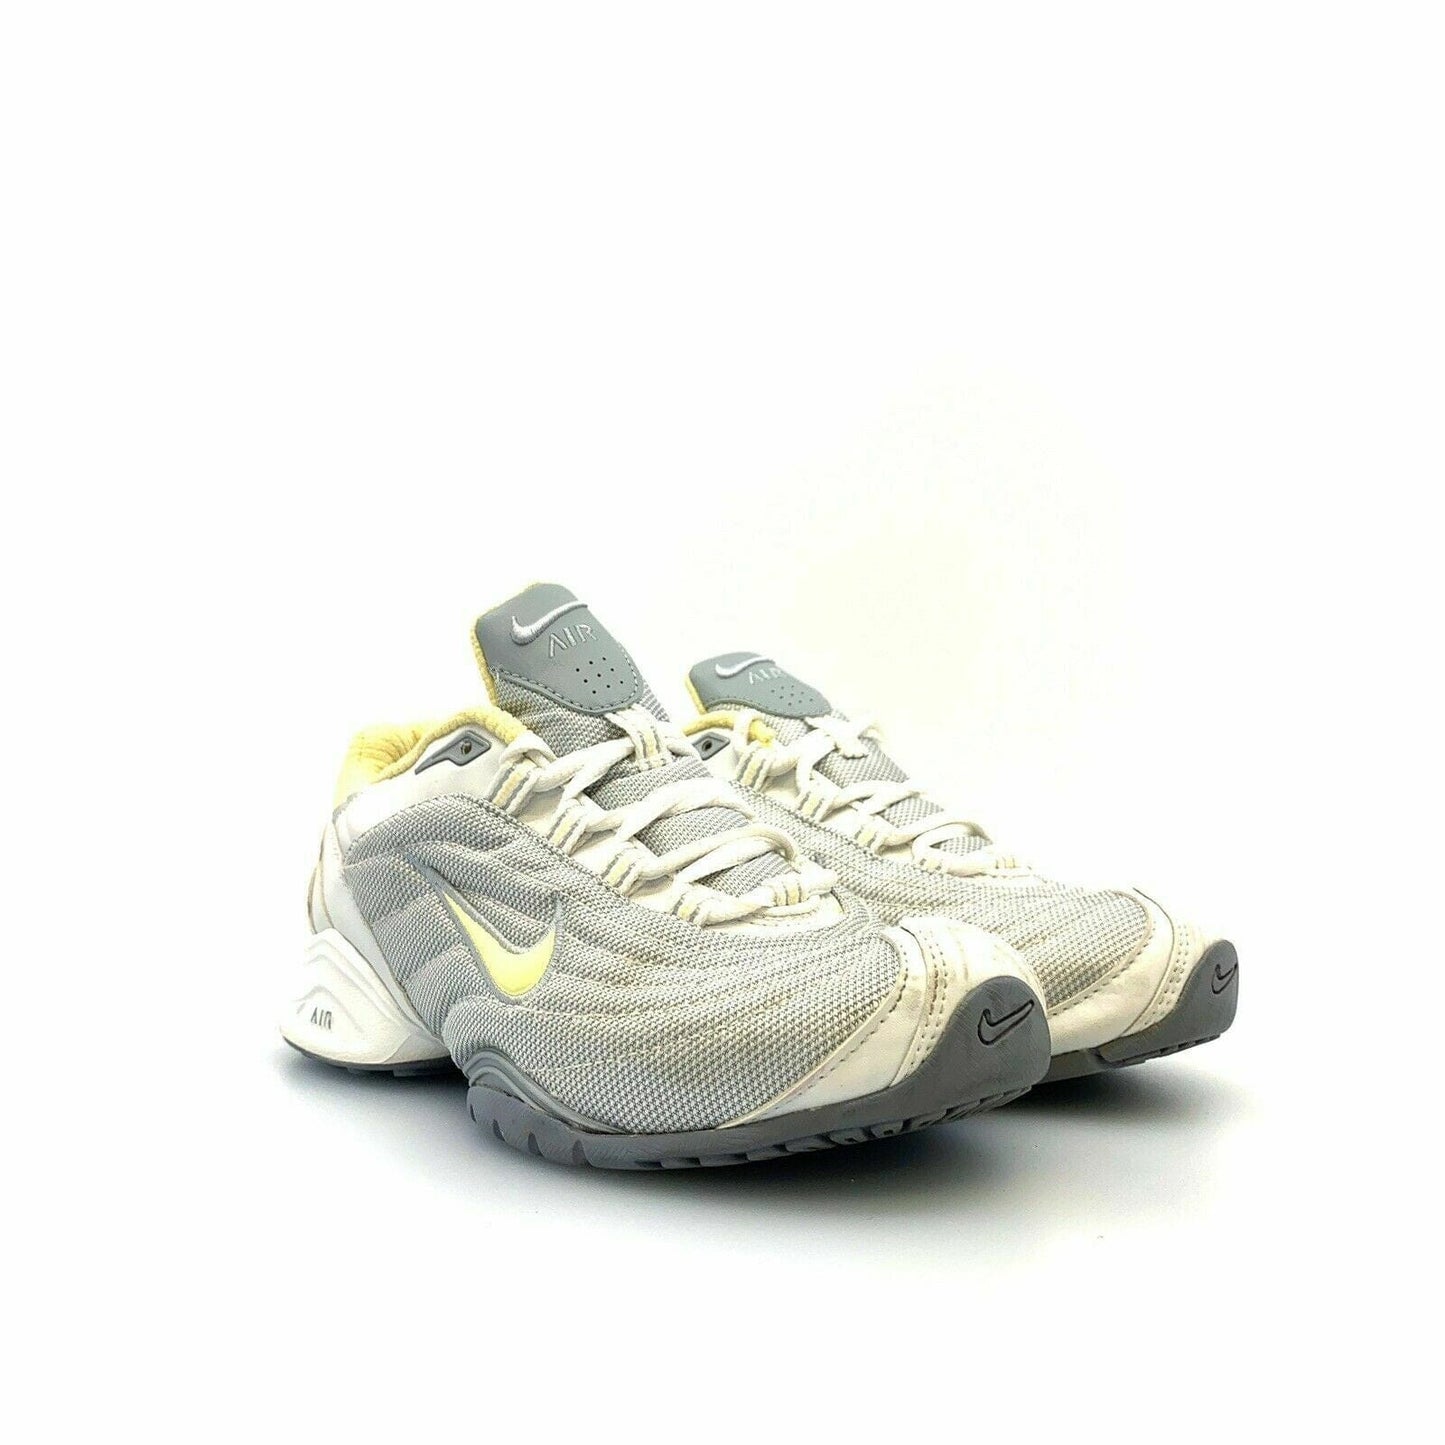 Captivating Nike Air Womens Size 6 Silver Yellow Training Athletic Shoes